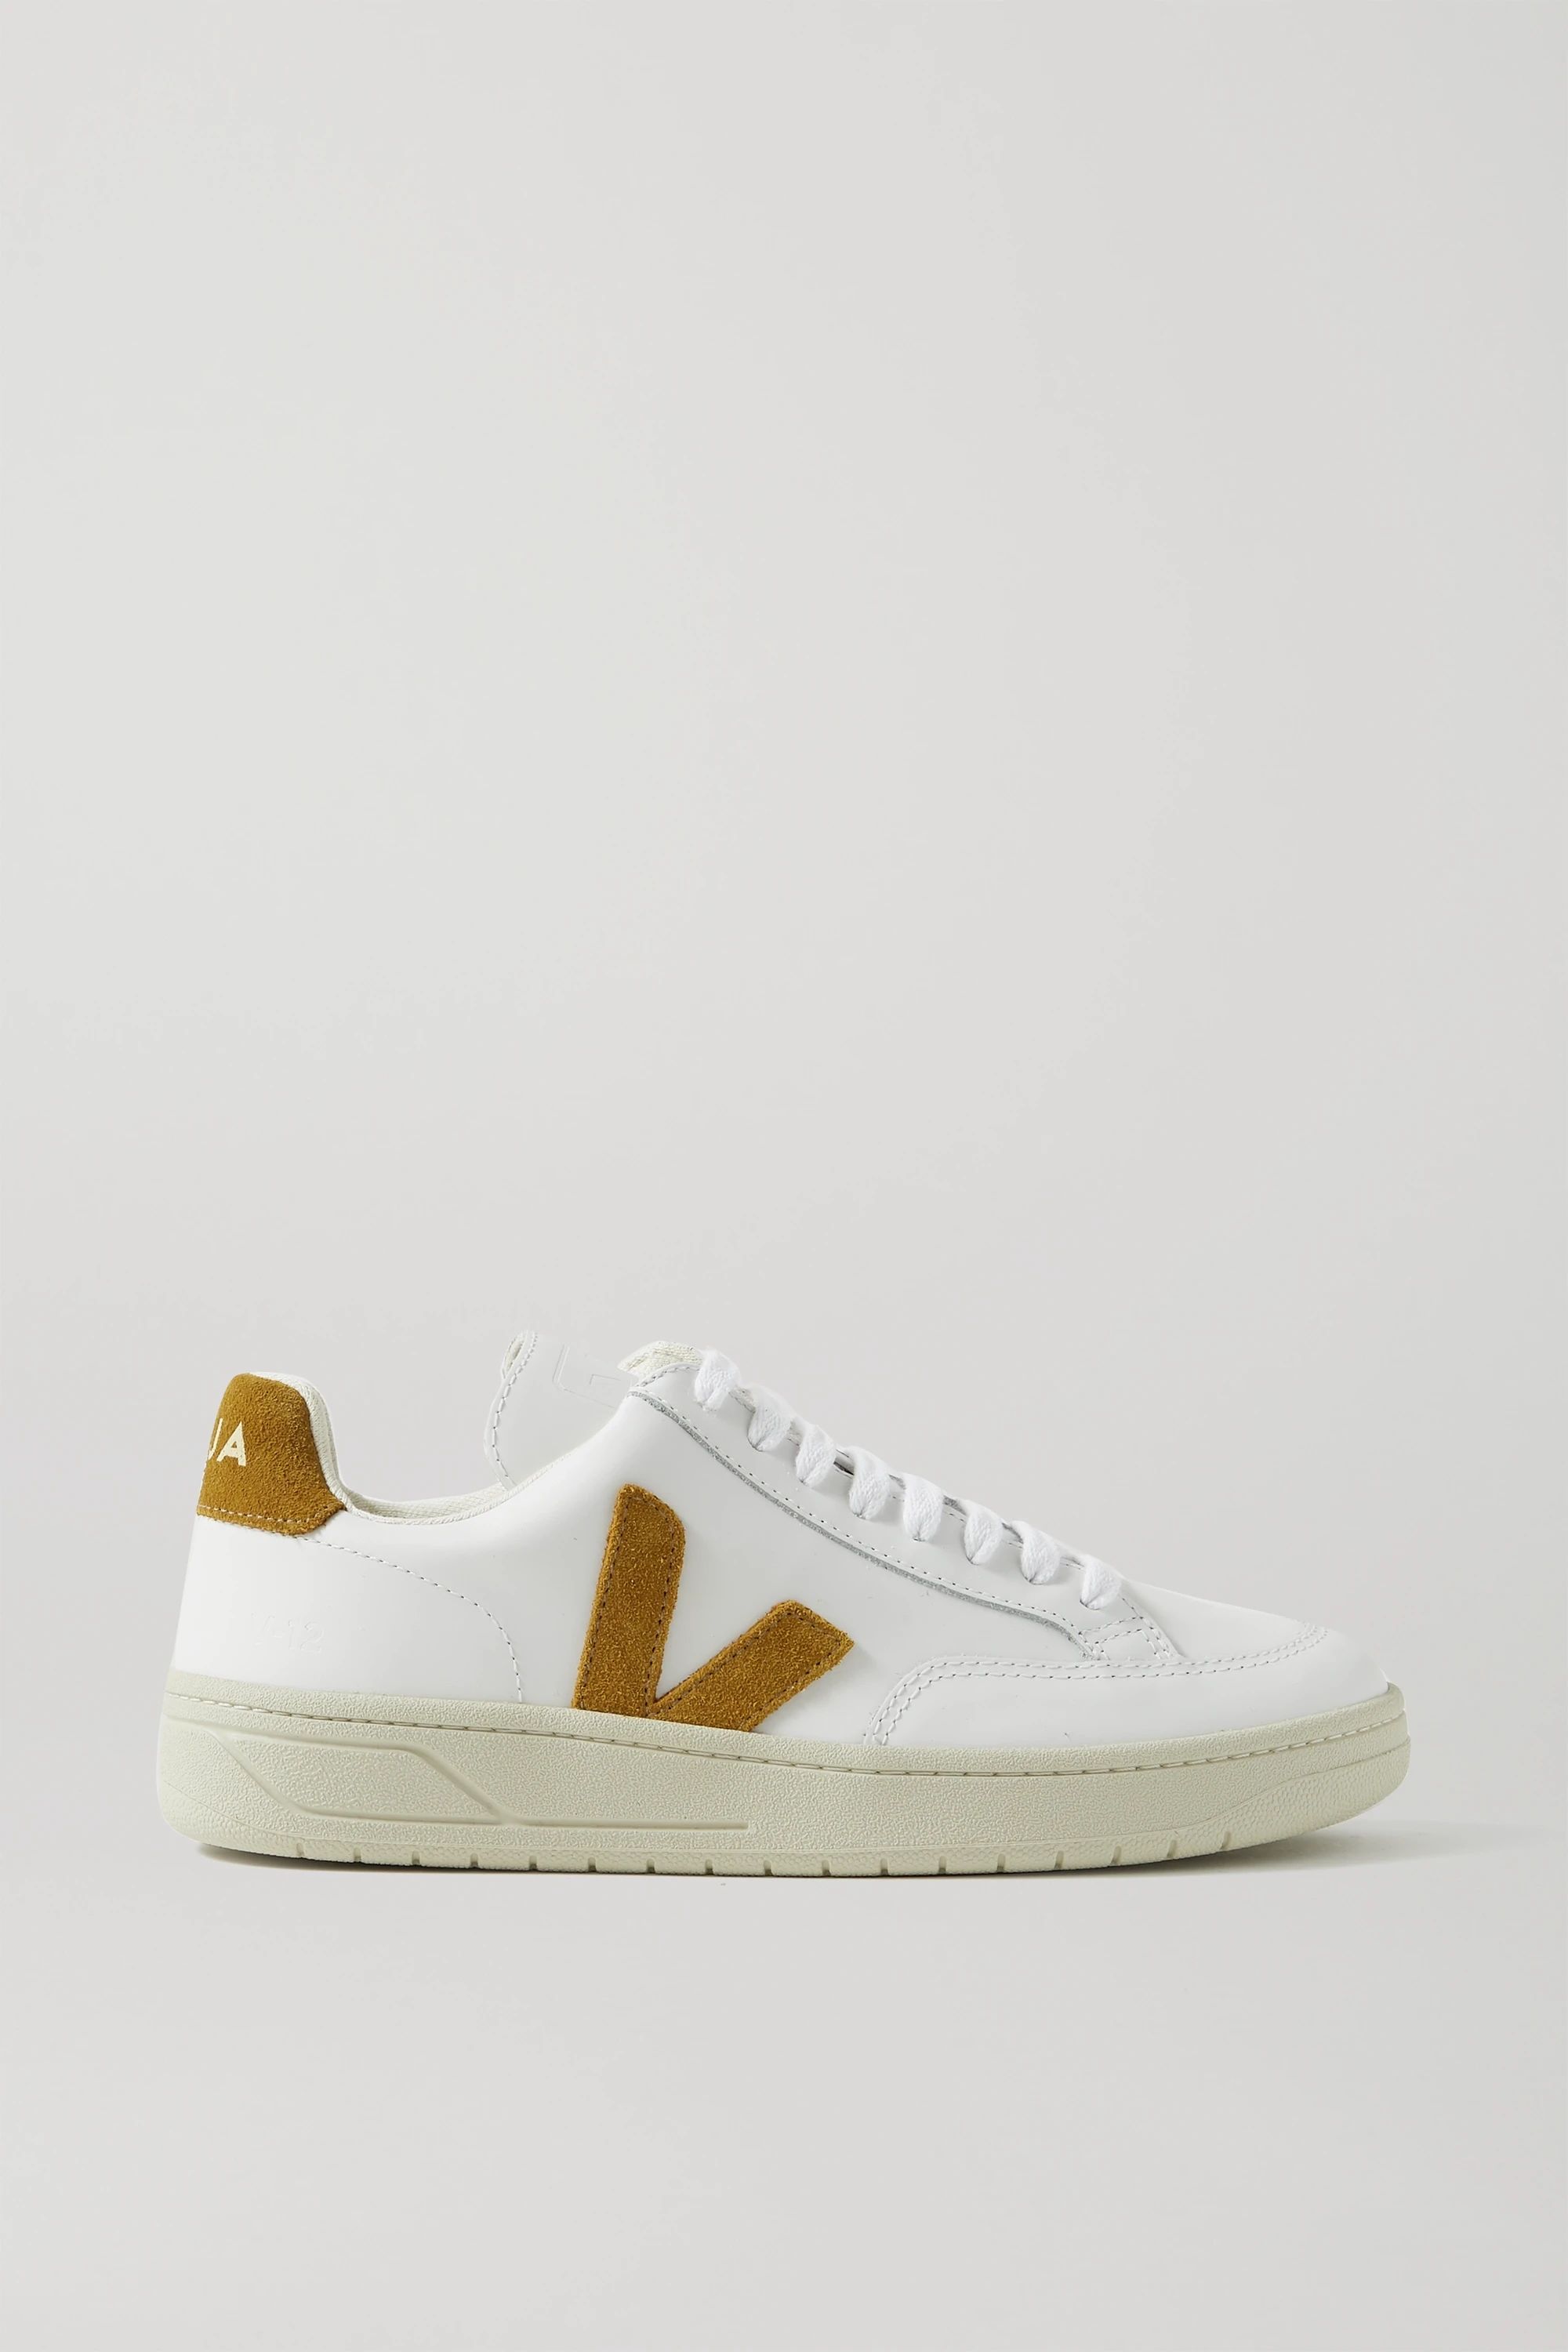 White + NET SUSTAIN V-12 suede-trimmed leather sneakers | Veja | NET-A-PORTER | NET-A-PORTER (US)